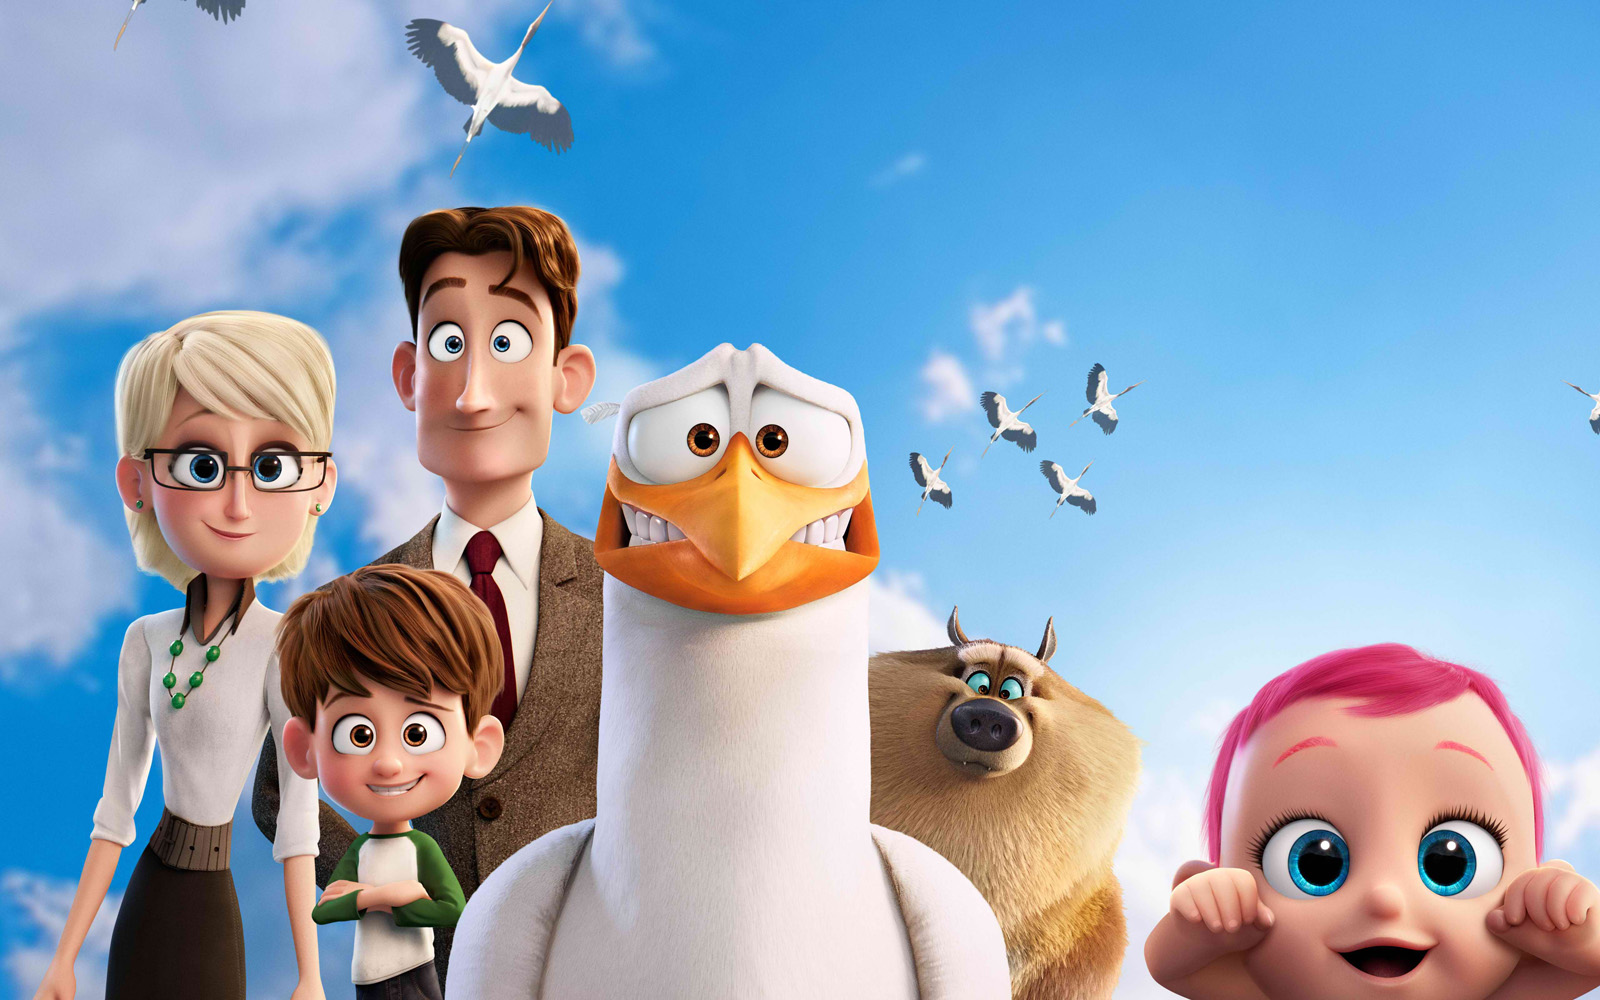 Jennifer Aniston, Ty Burrell are workaholic parents in “STORKS”